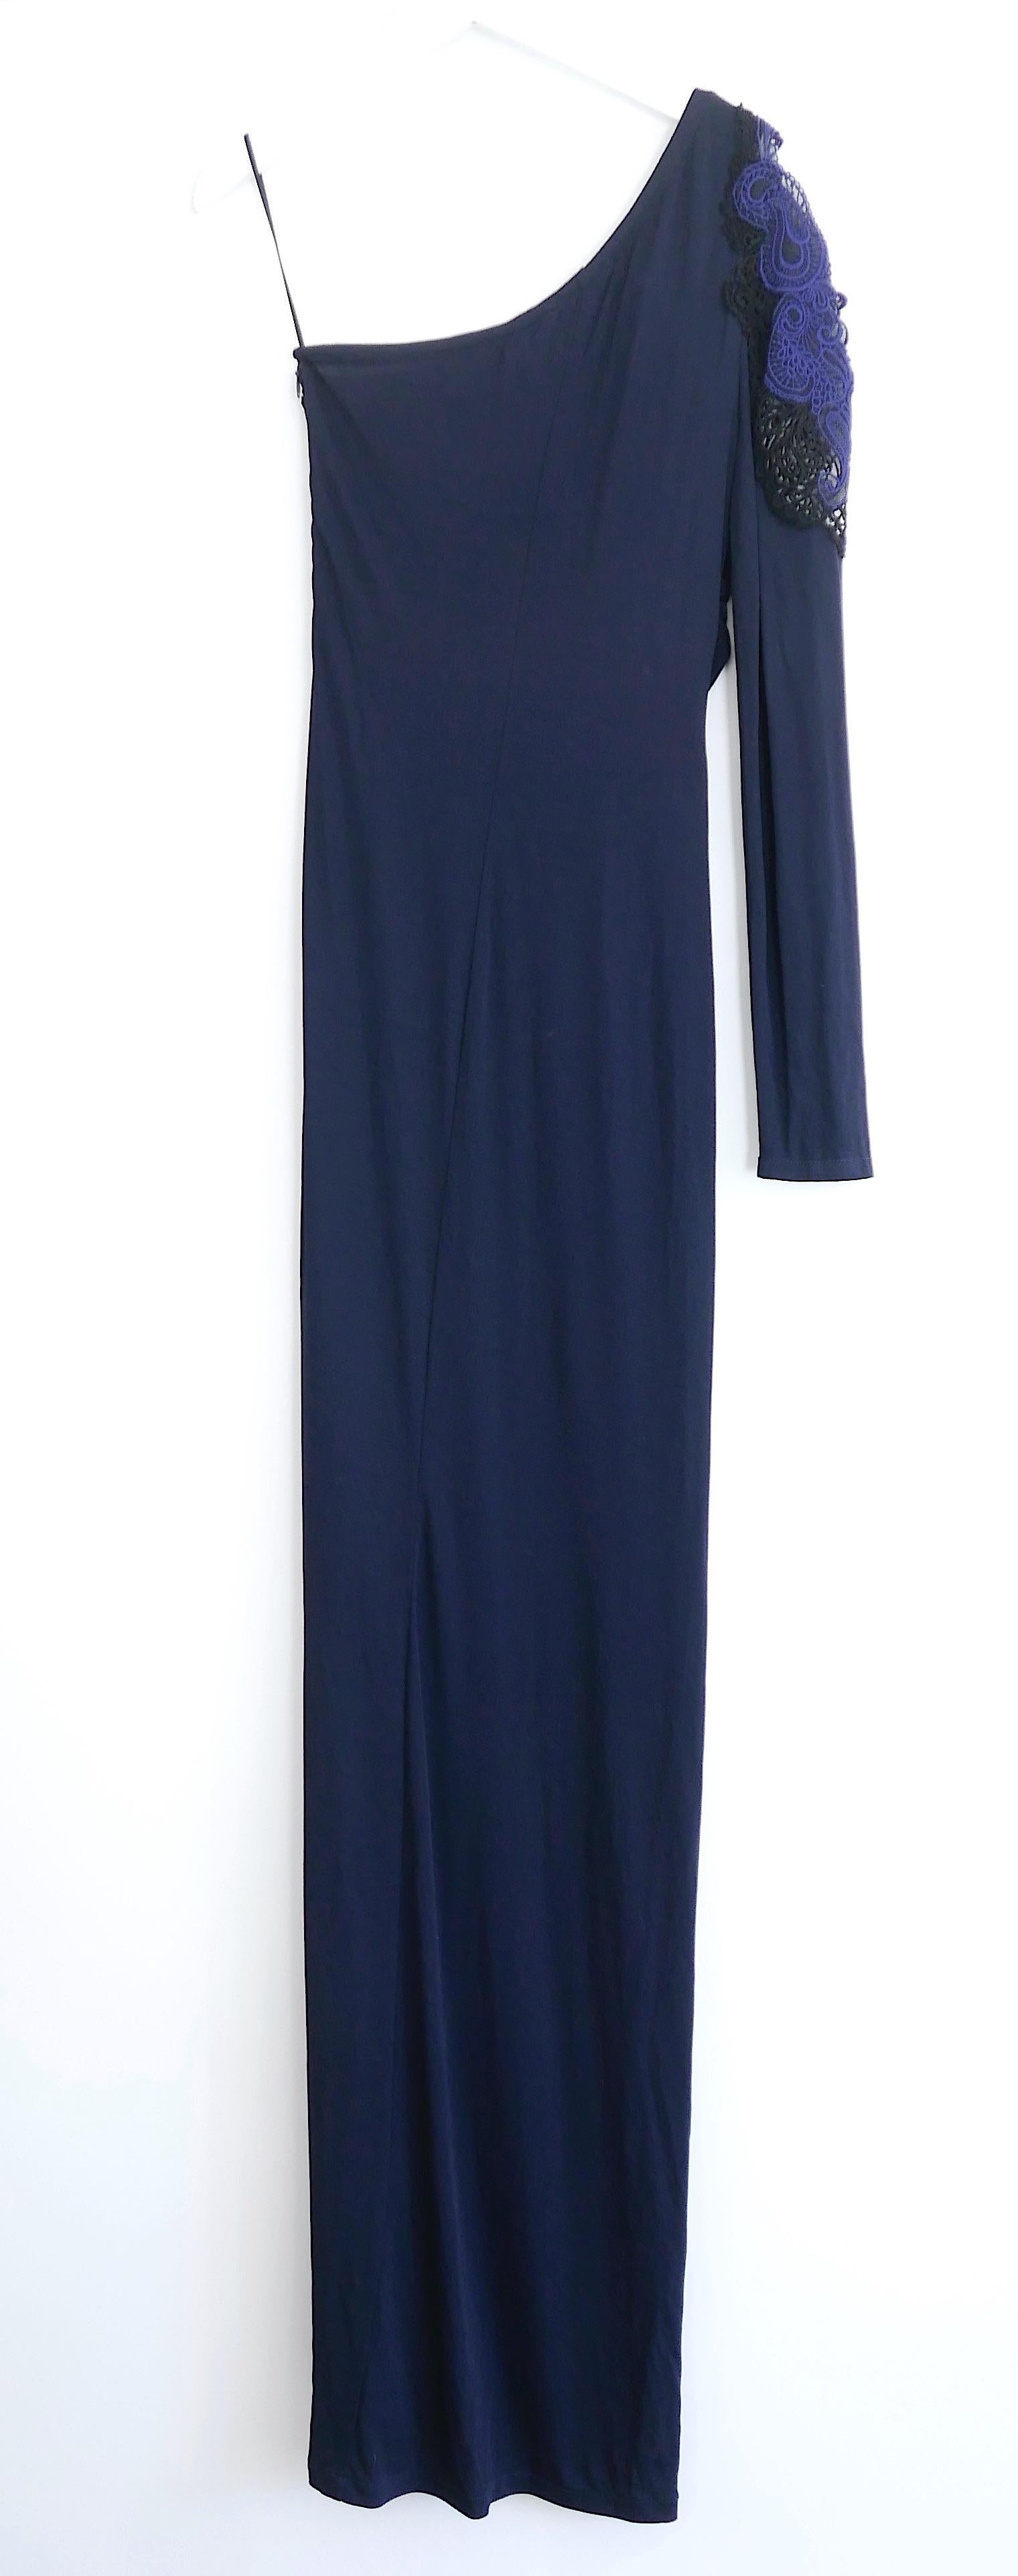 Yigal Azrouel Lace Shoulder Jersey Evening Gown Dress In New Condition For Sale In London, GB